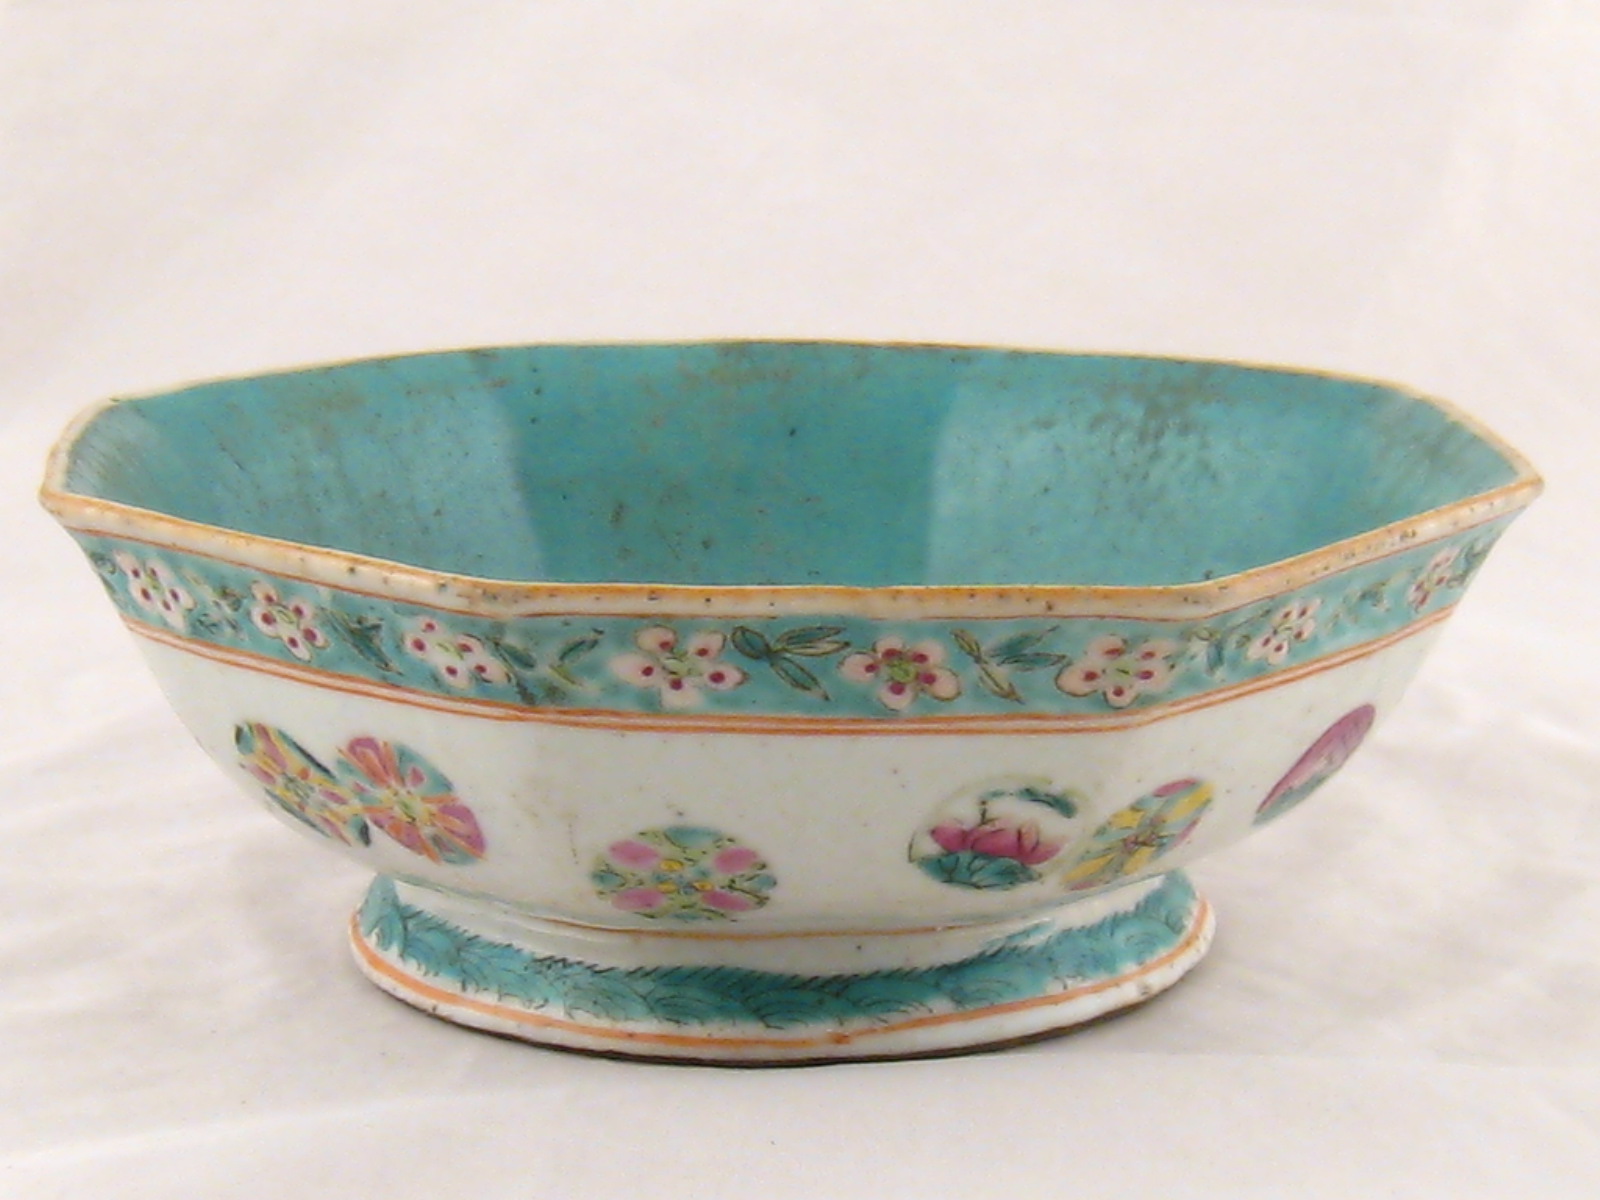 A Chinese 19th. c. ceramic octagonal bowl, the interior celadon glazed, red seal mark to base.